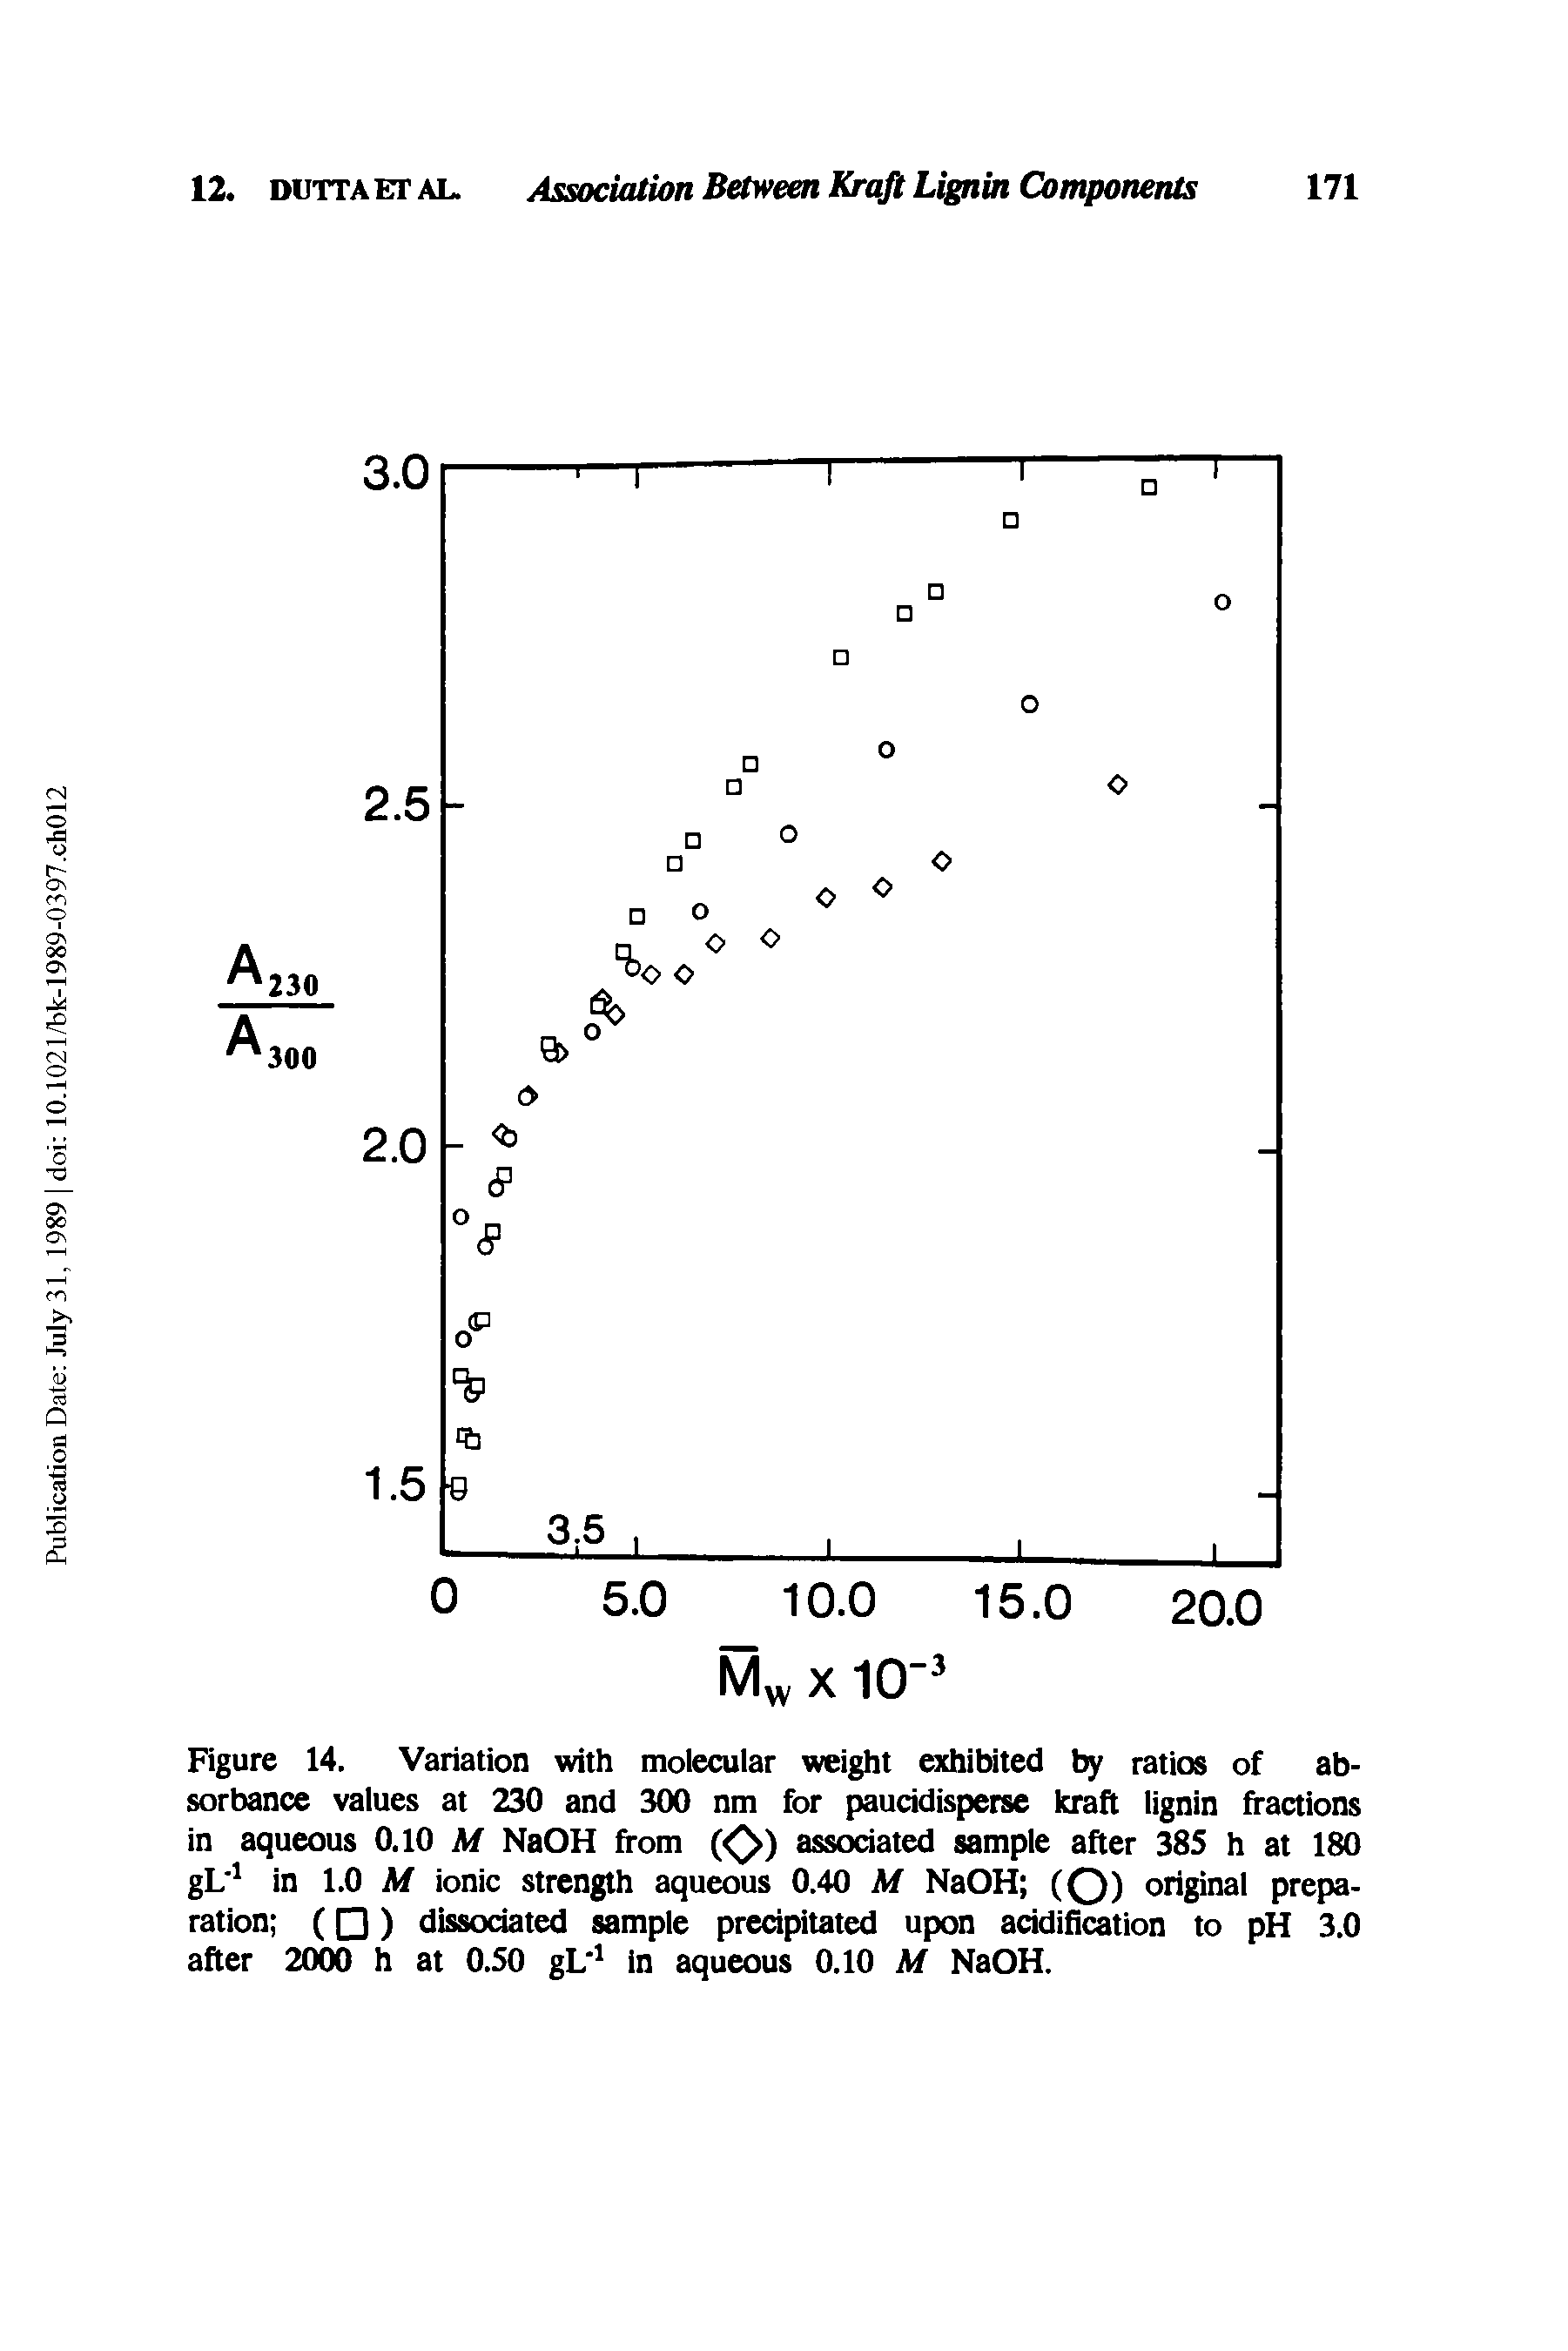 Figure 14. Variation with molecular weight exhibited by ratios of absorbance values at 230 and 300 nm for paucidisperse kraft lignin fractions in aqueous 0.10 M NaOH from ( ) associated sample after 385 h at 180 gL 1 in 1.0 M ionic strength aqueous 0.40 M NaOH (O) original preparation ( ) dissociated sample precipitated upon acidification to pH 3.0 after 2000 h at 0.50 gL"1 in aqueous 0.10 M NaOH.